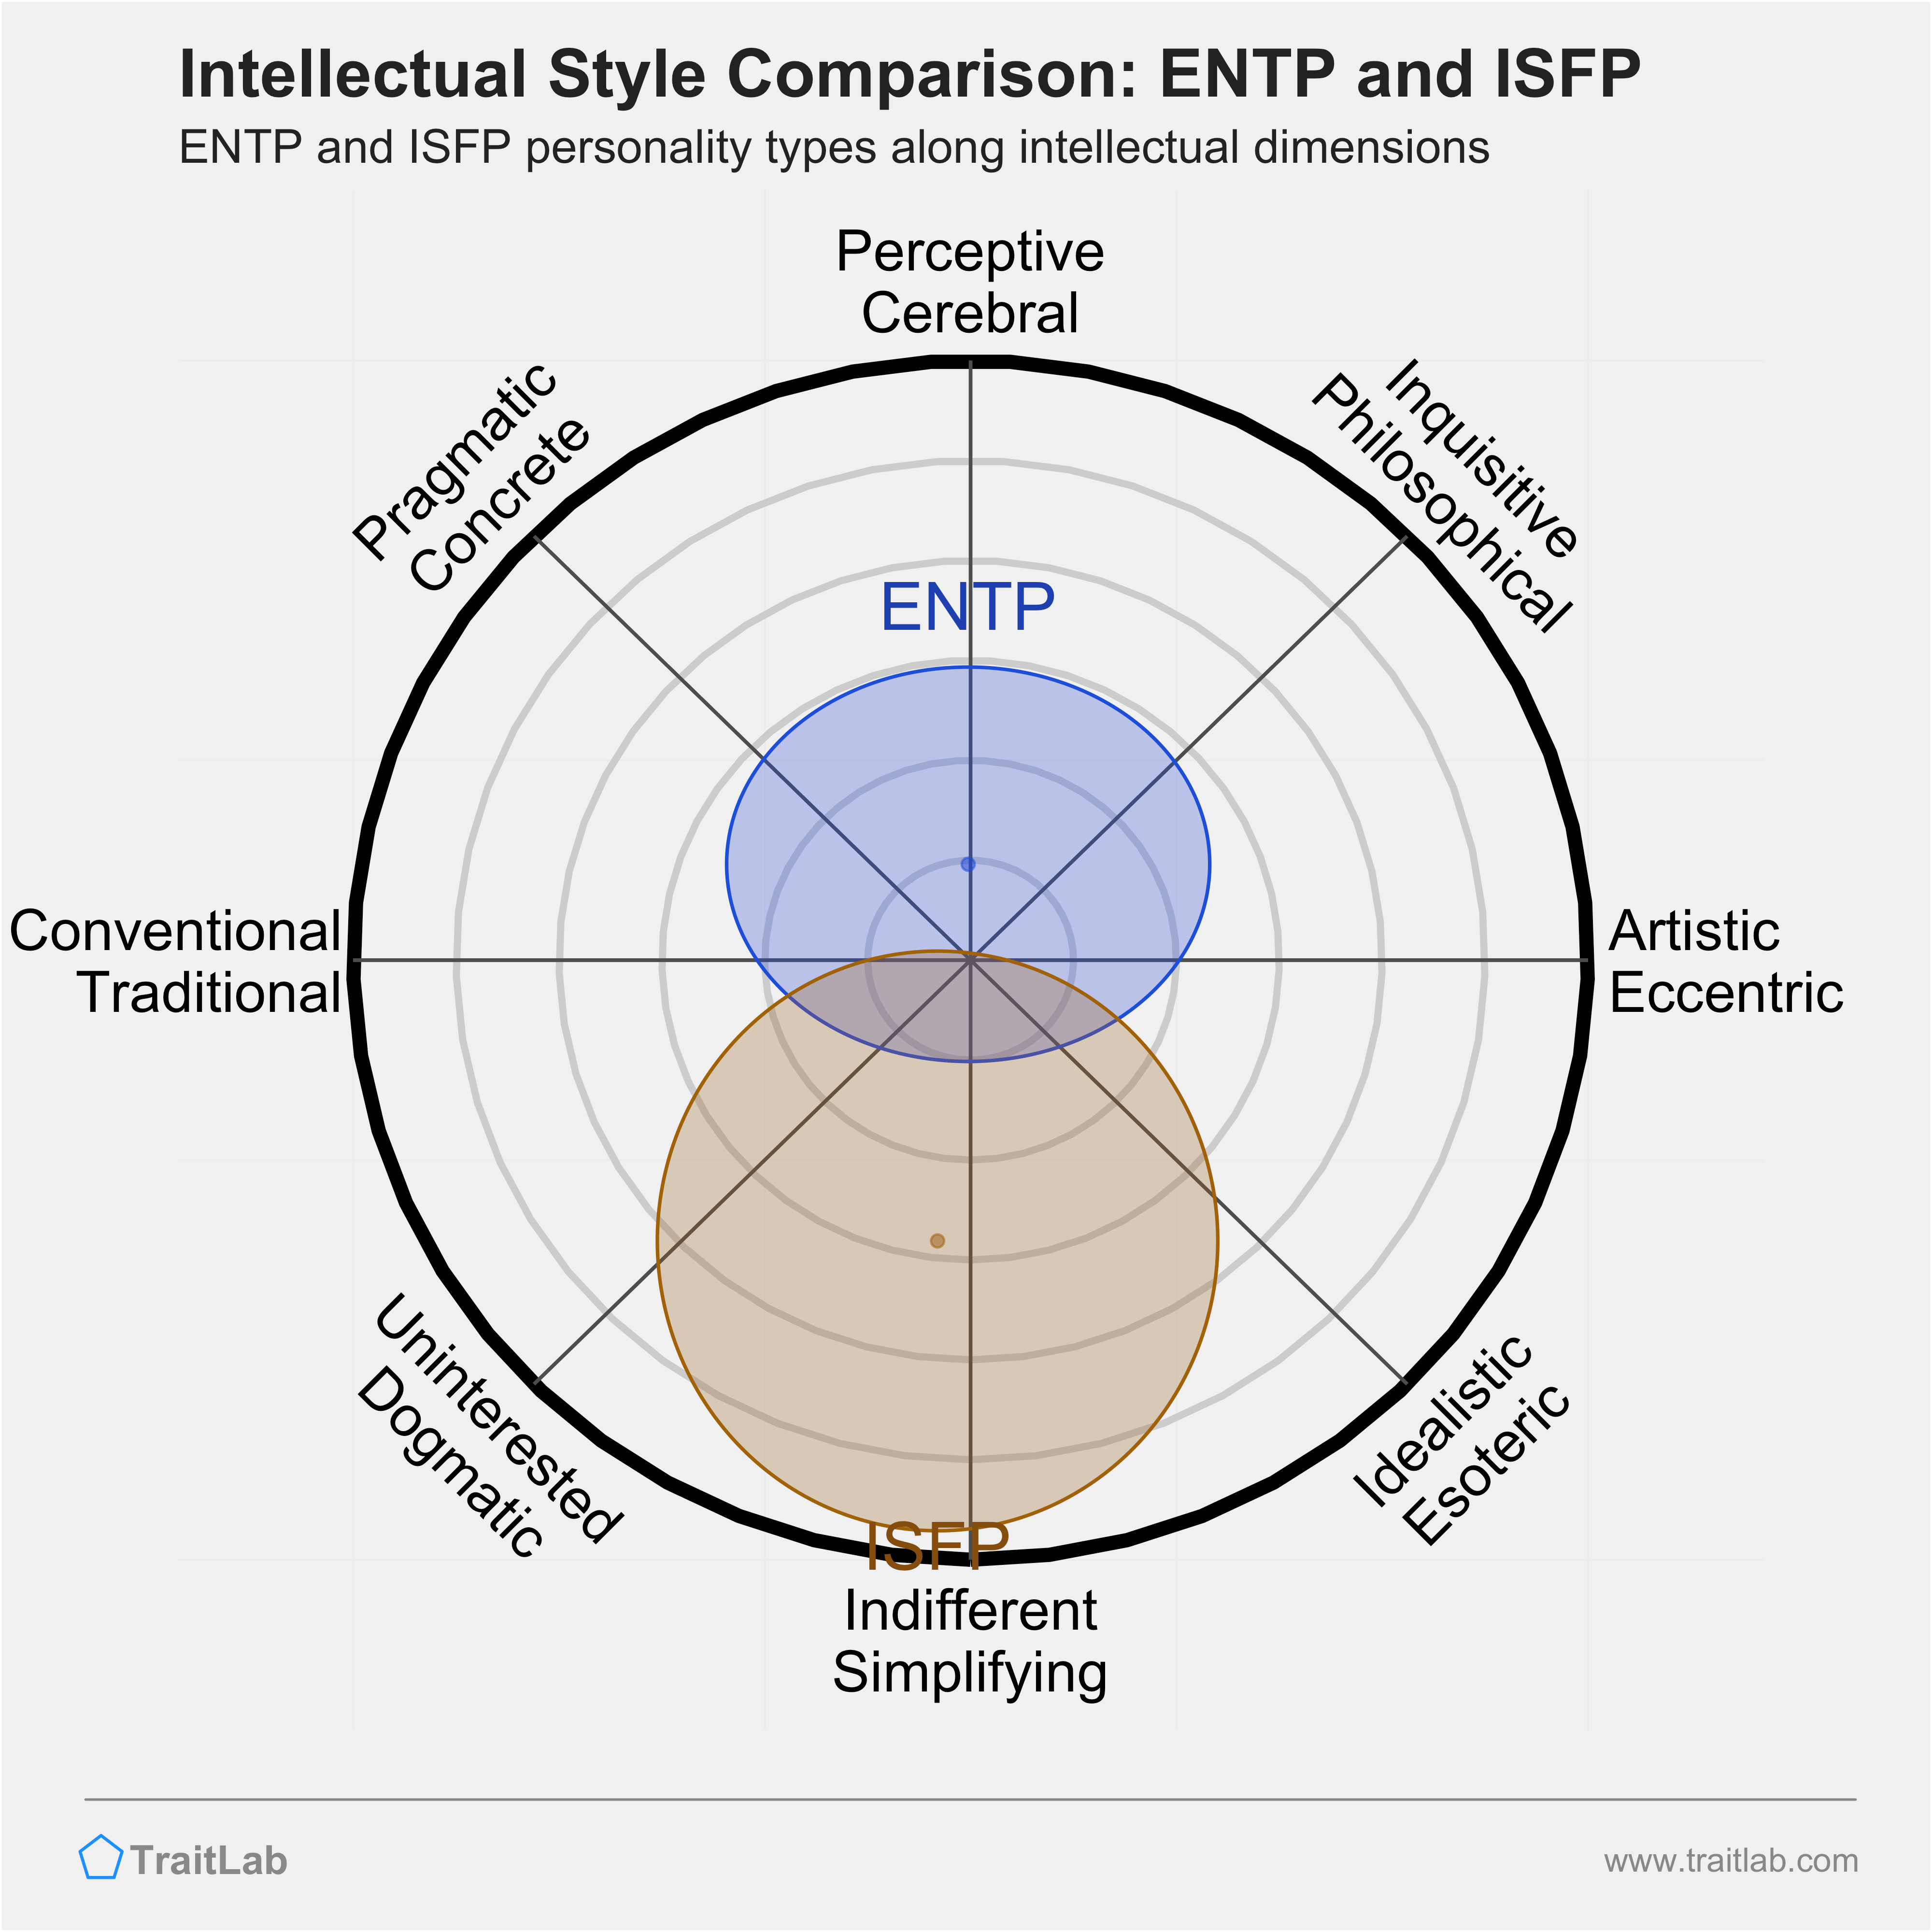 ENTP and ISFP comparison across intellectual dimensions